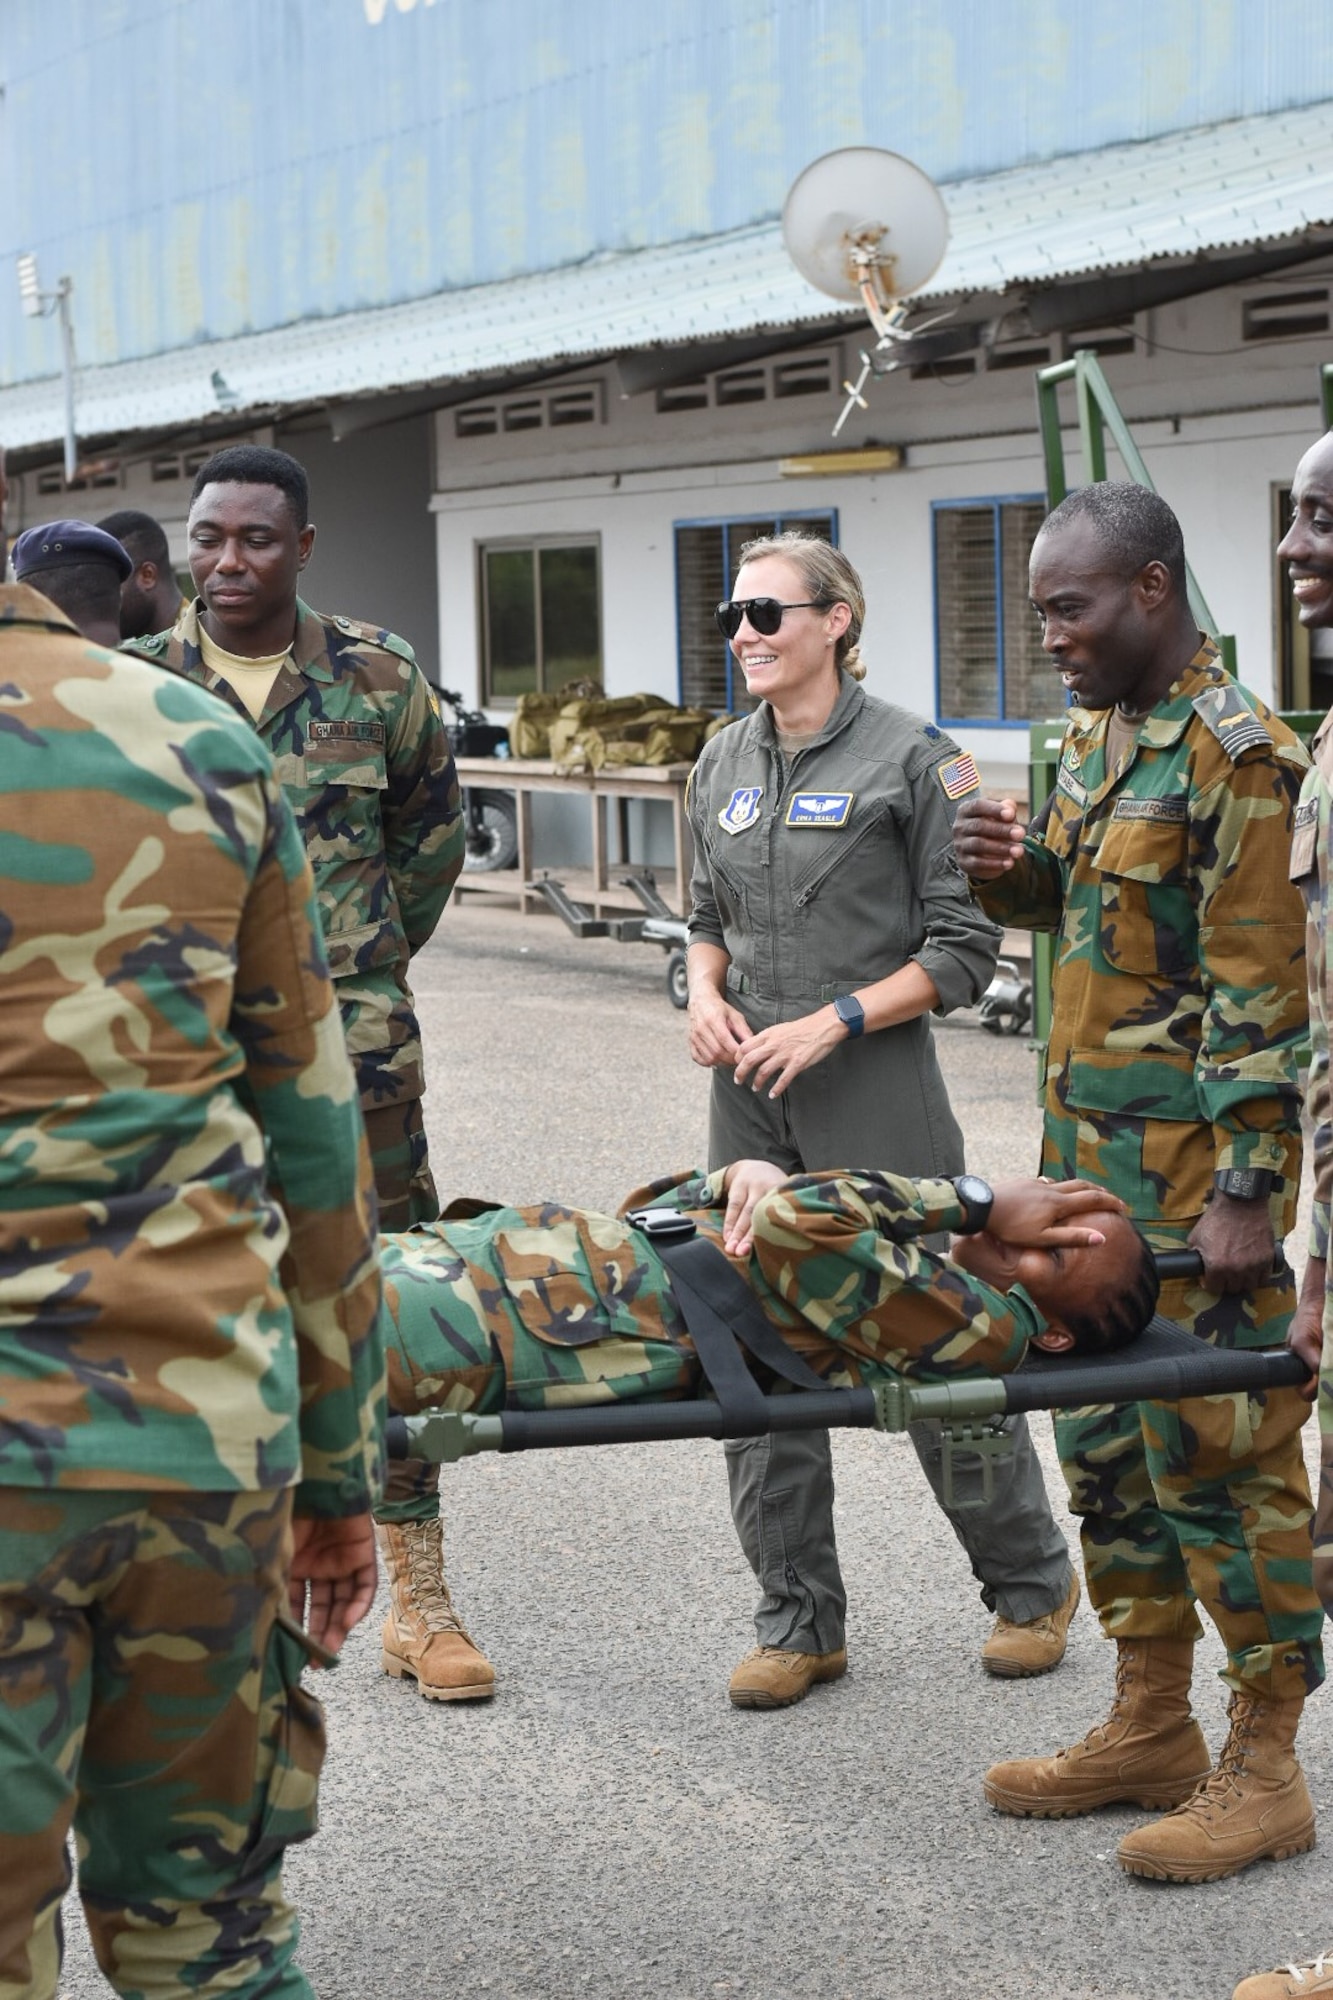 U.S. Air Force Lt. Col. Erika Seagle, an instructor with the U.S. Defense Institute for Medical Operations, advises as members of the Ghana Armed Forces practice litter carries during a training event in Accra, Ghana, in early May. The training was part of the GAF’s pursuit of United Nations validation of its Aeromedical Evacuation Team capabilities. (Courtesy photo)